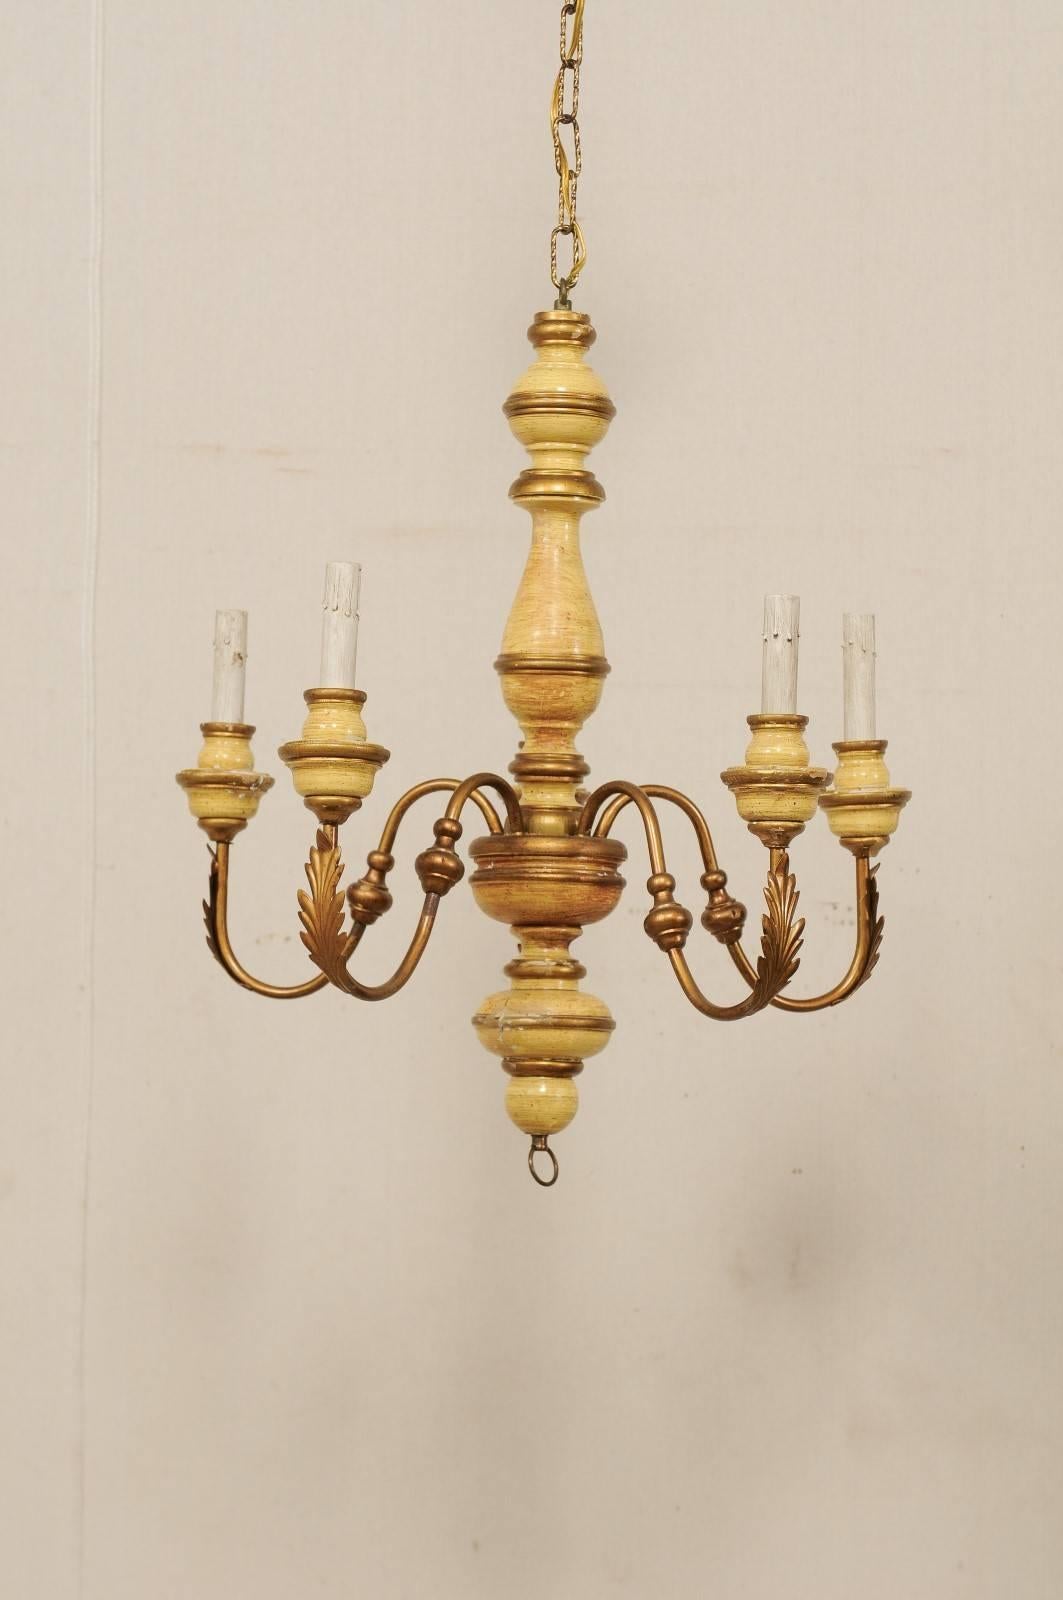 20th Century French Five-Light Painted Wood and Metal Chandelier with Warm Beige & Gold Tones For Sale